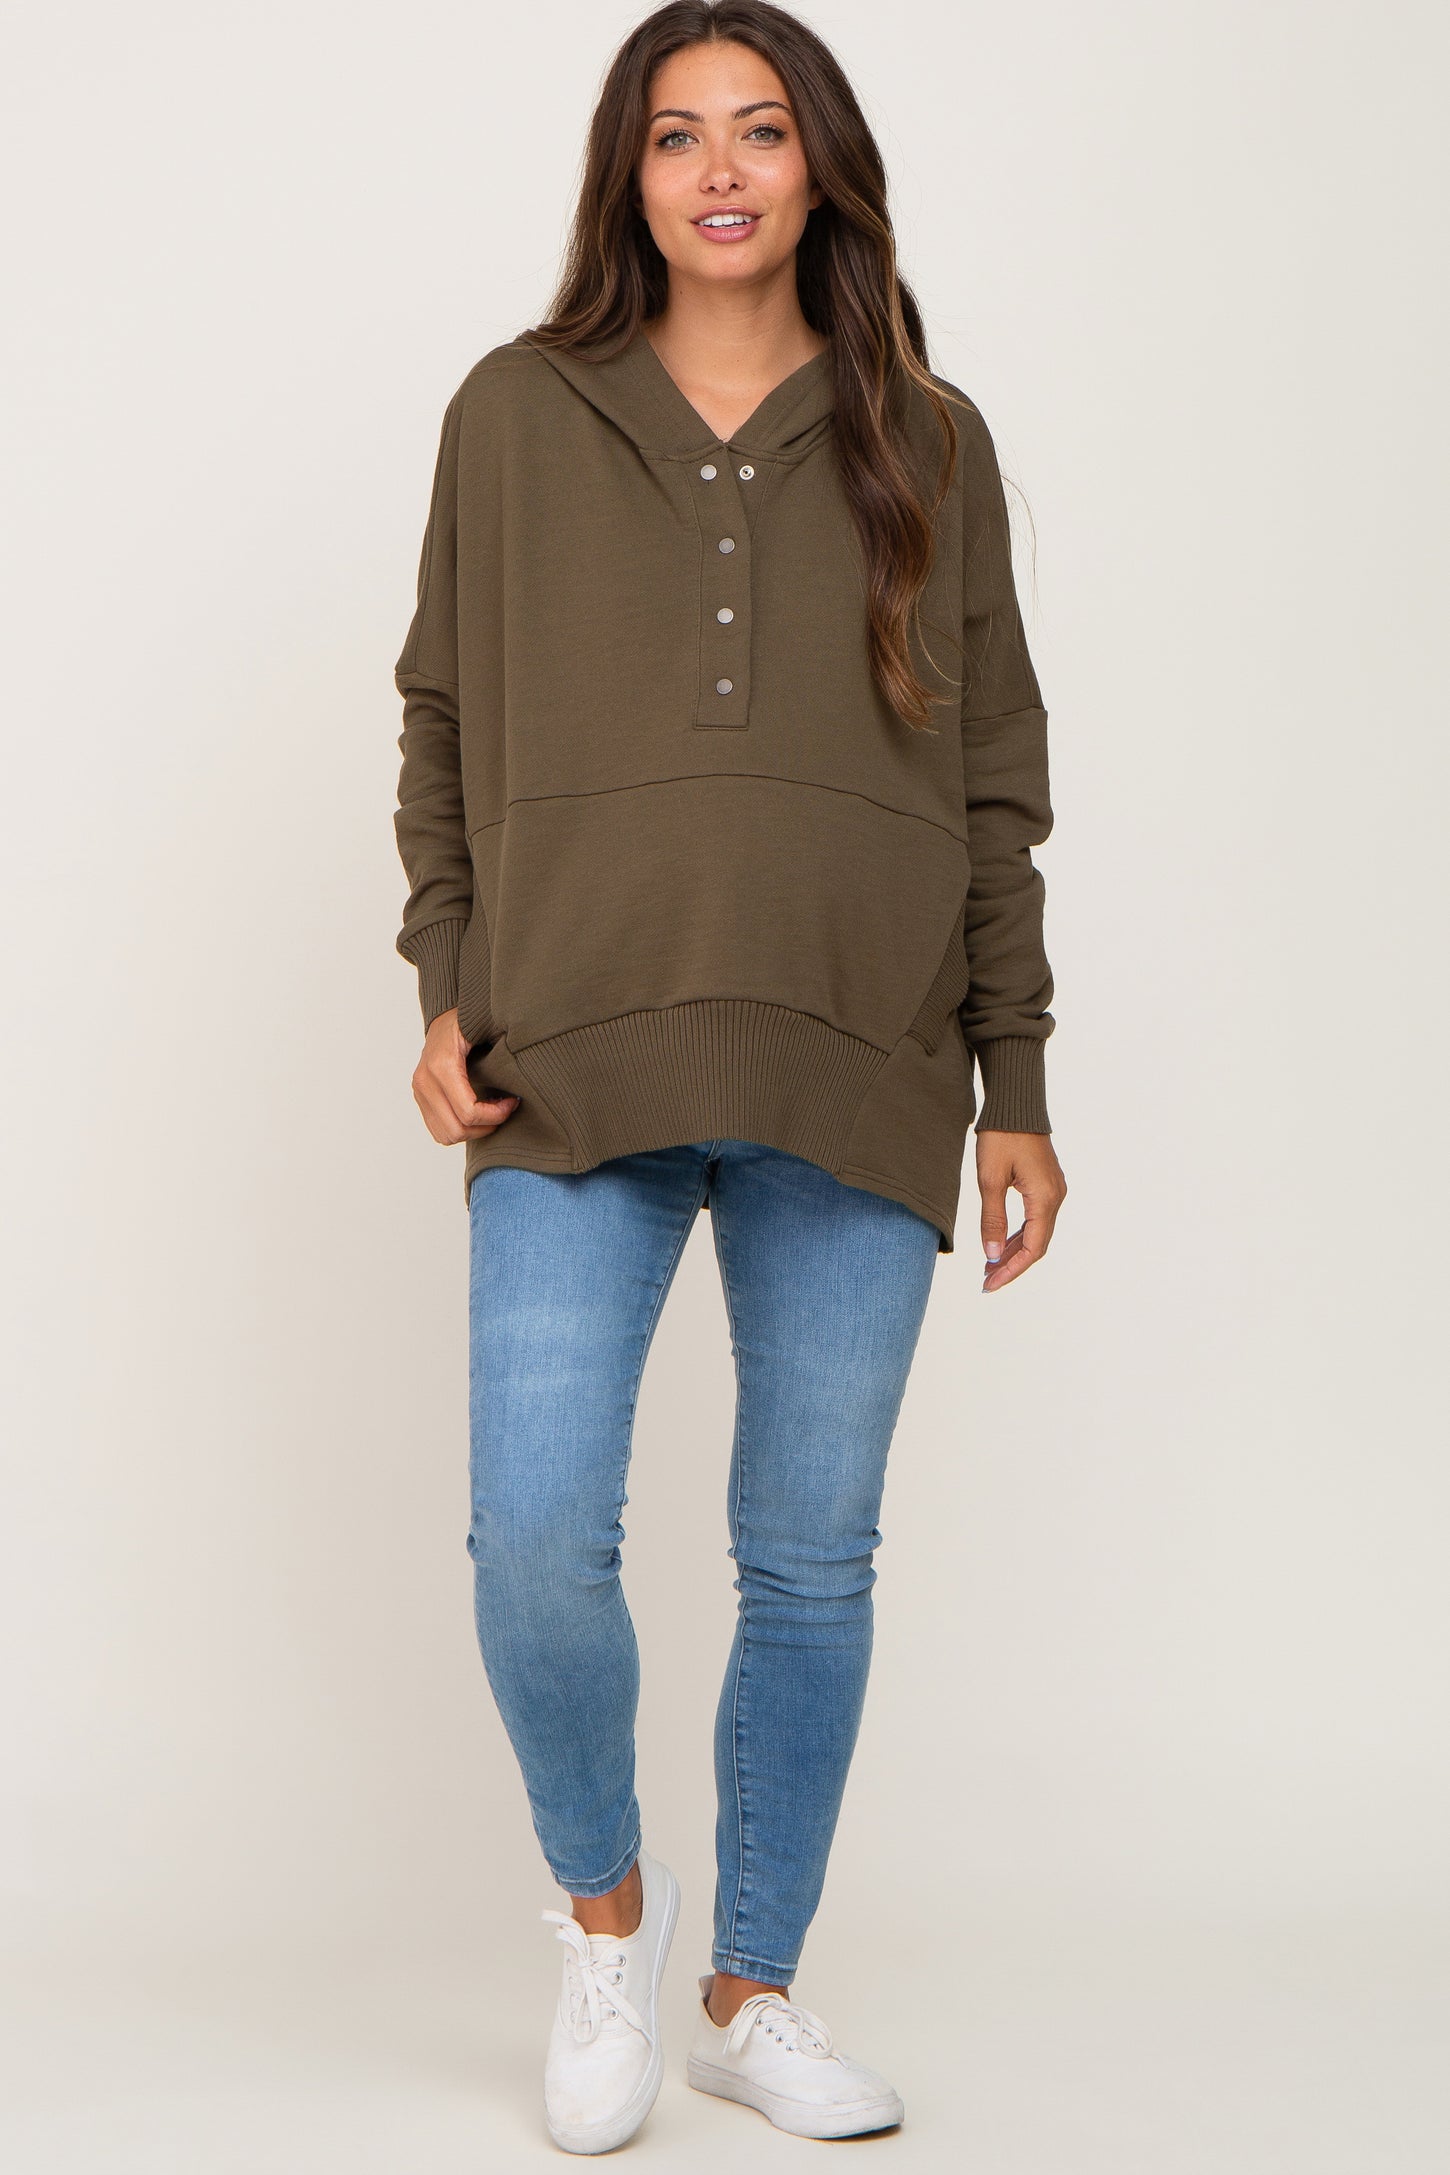 Olive Button Front Ribbed Trim Hooded Maternity Sweatshirt